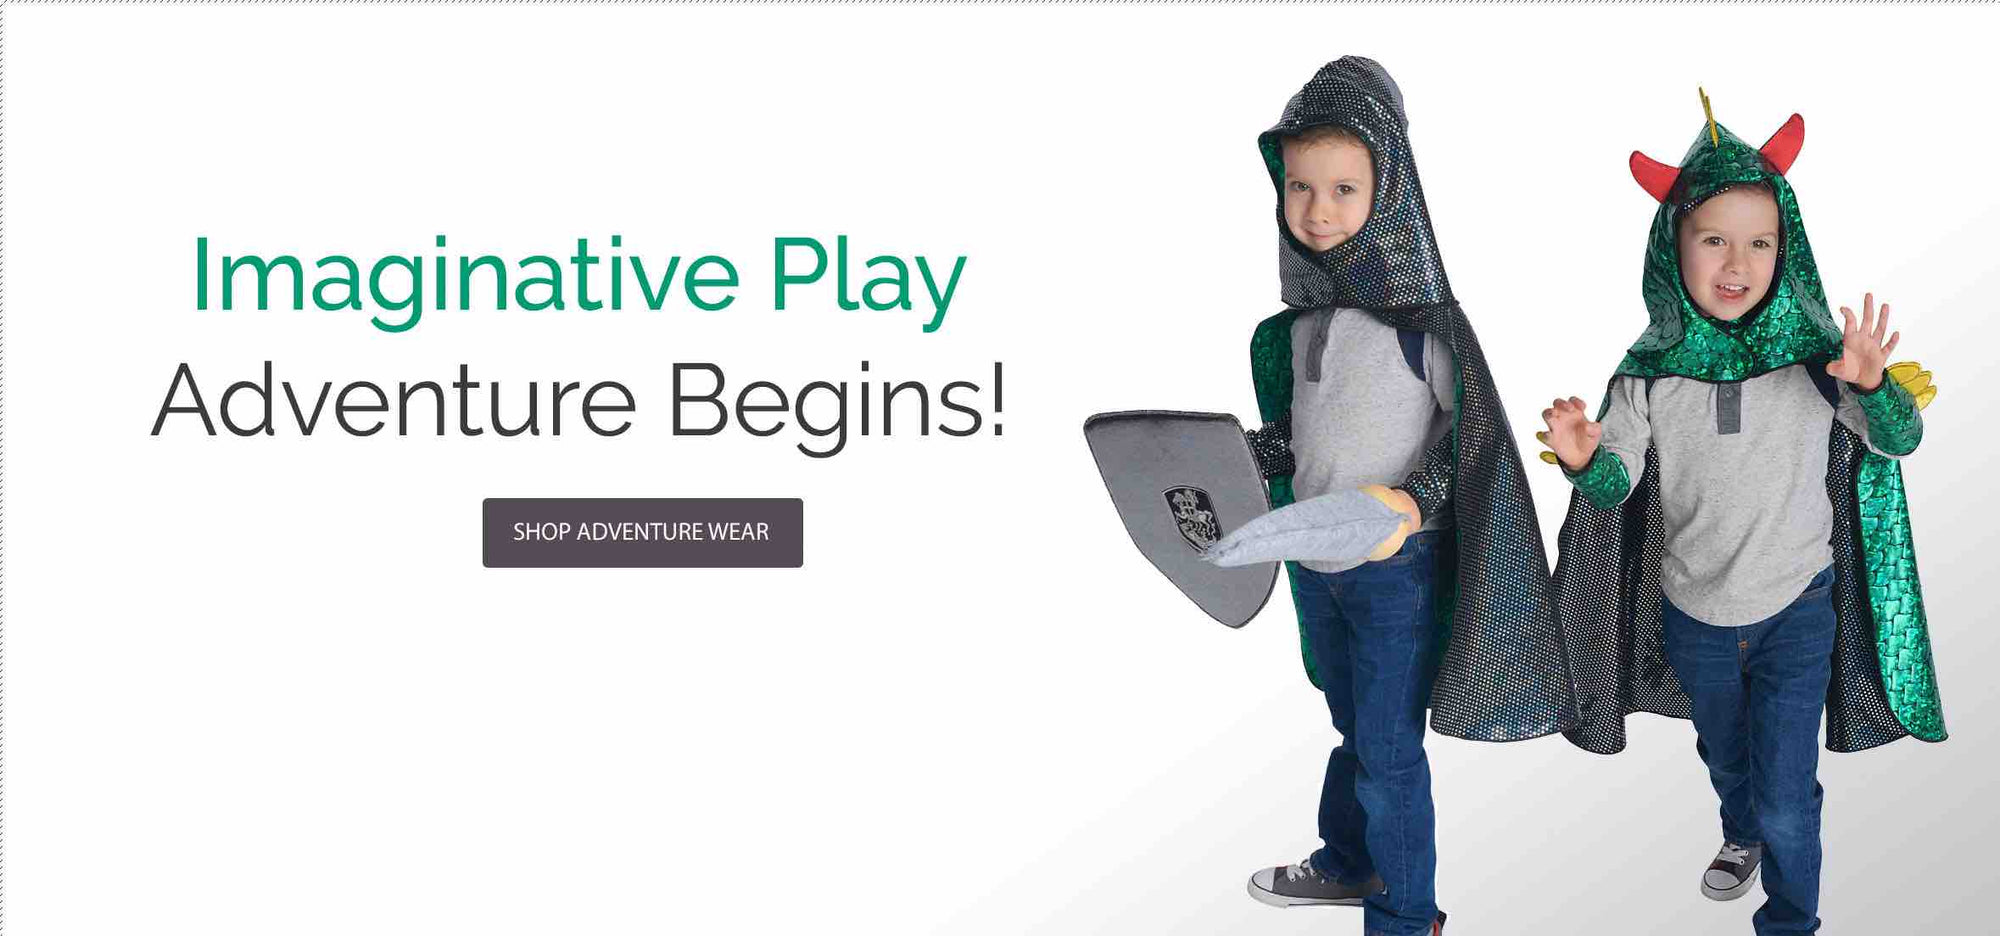 Image of kids wearing imaginative play capes and costumes. Text reads: Imaginative Play. Adventure Begins!